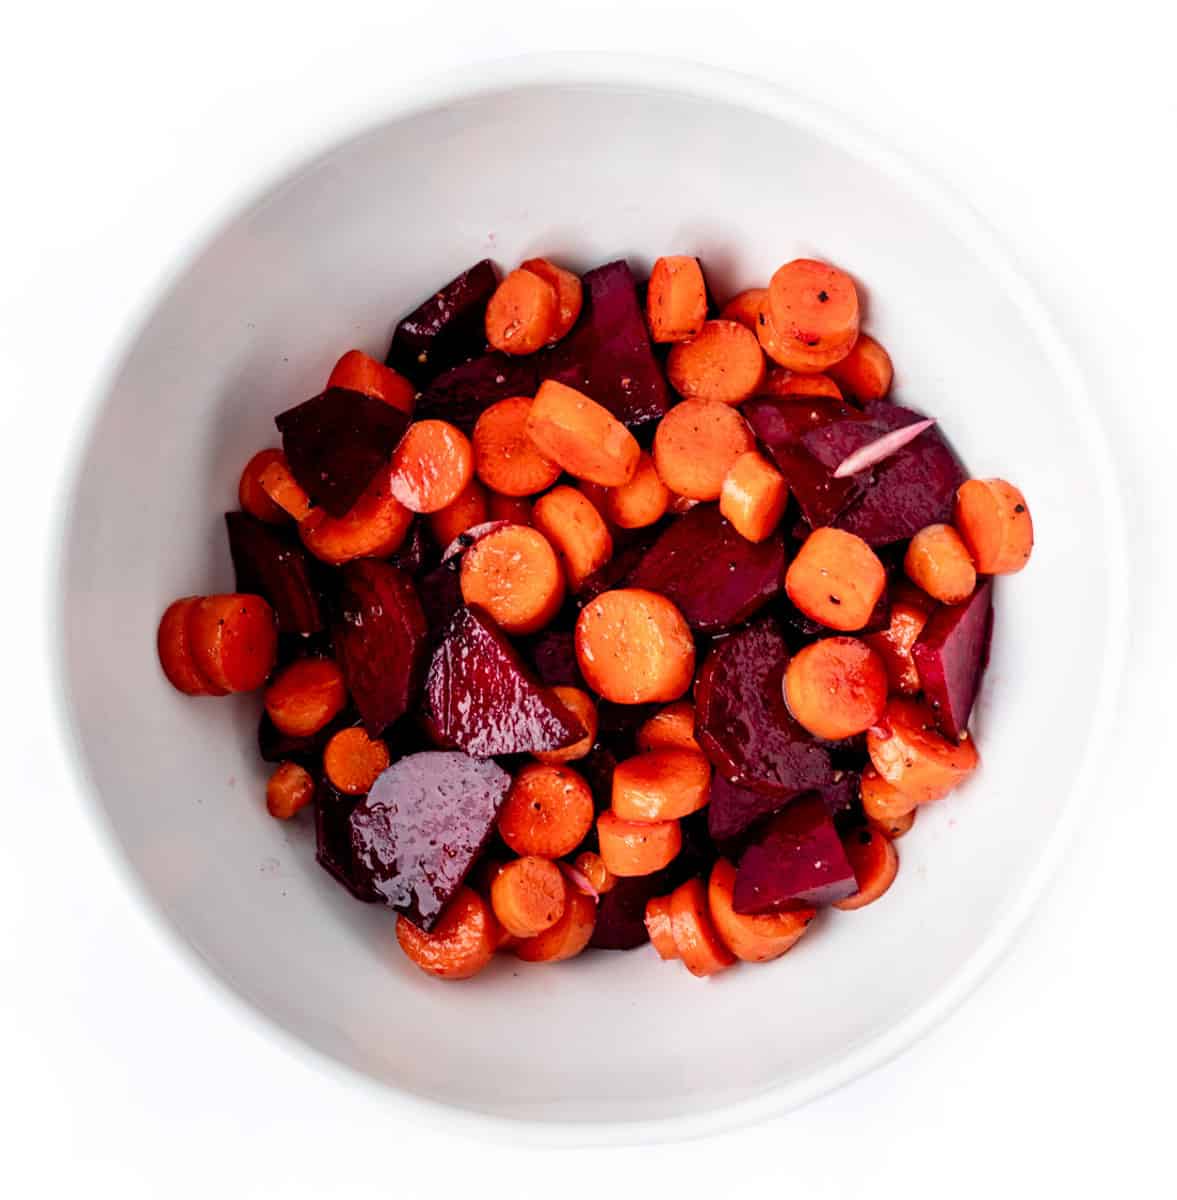 Carrots and beets in a white bowl.